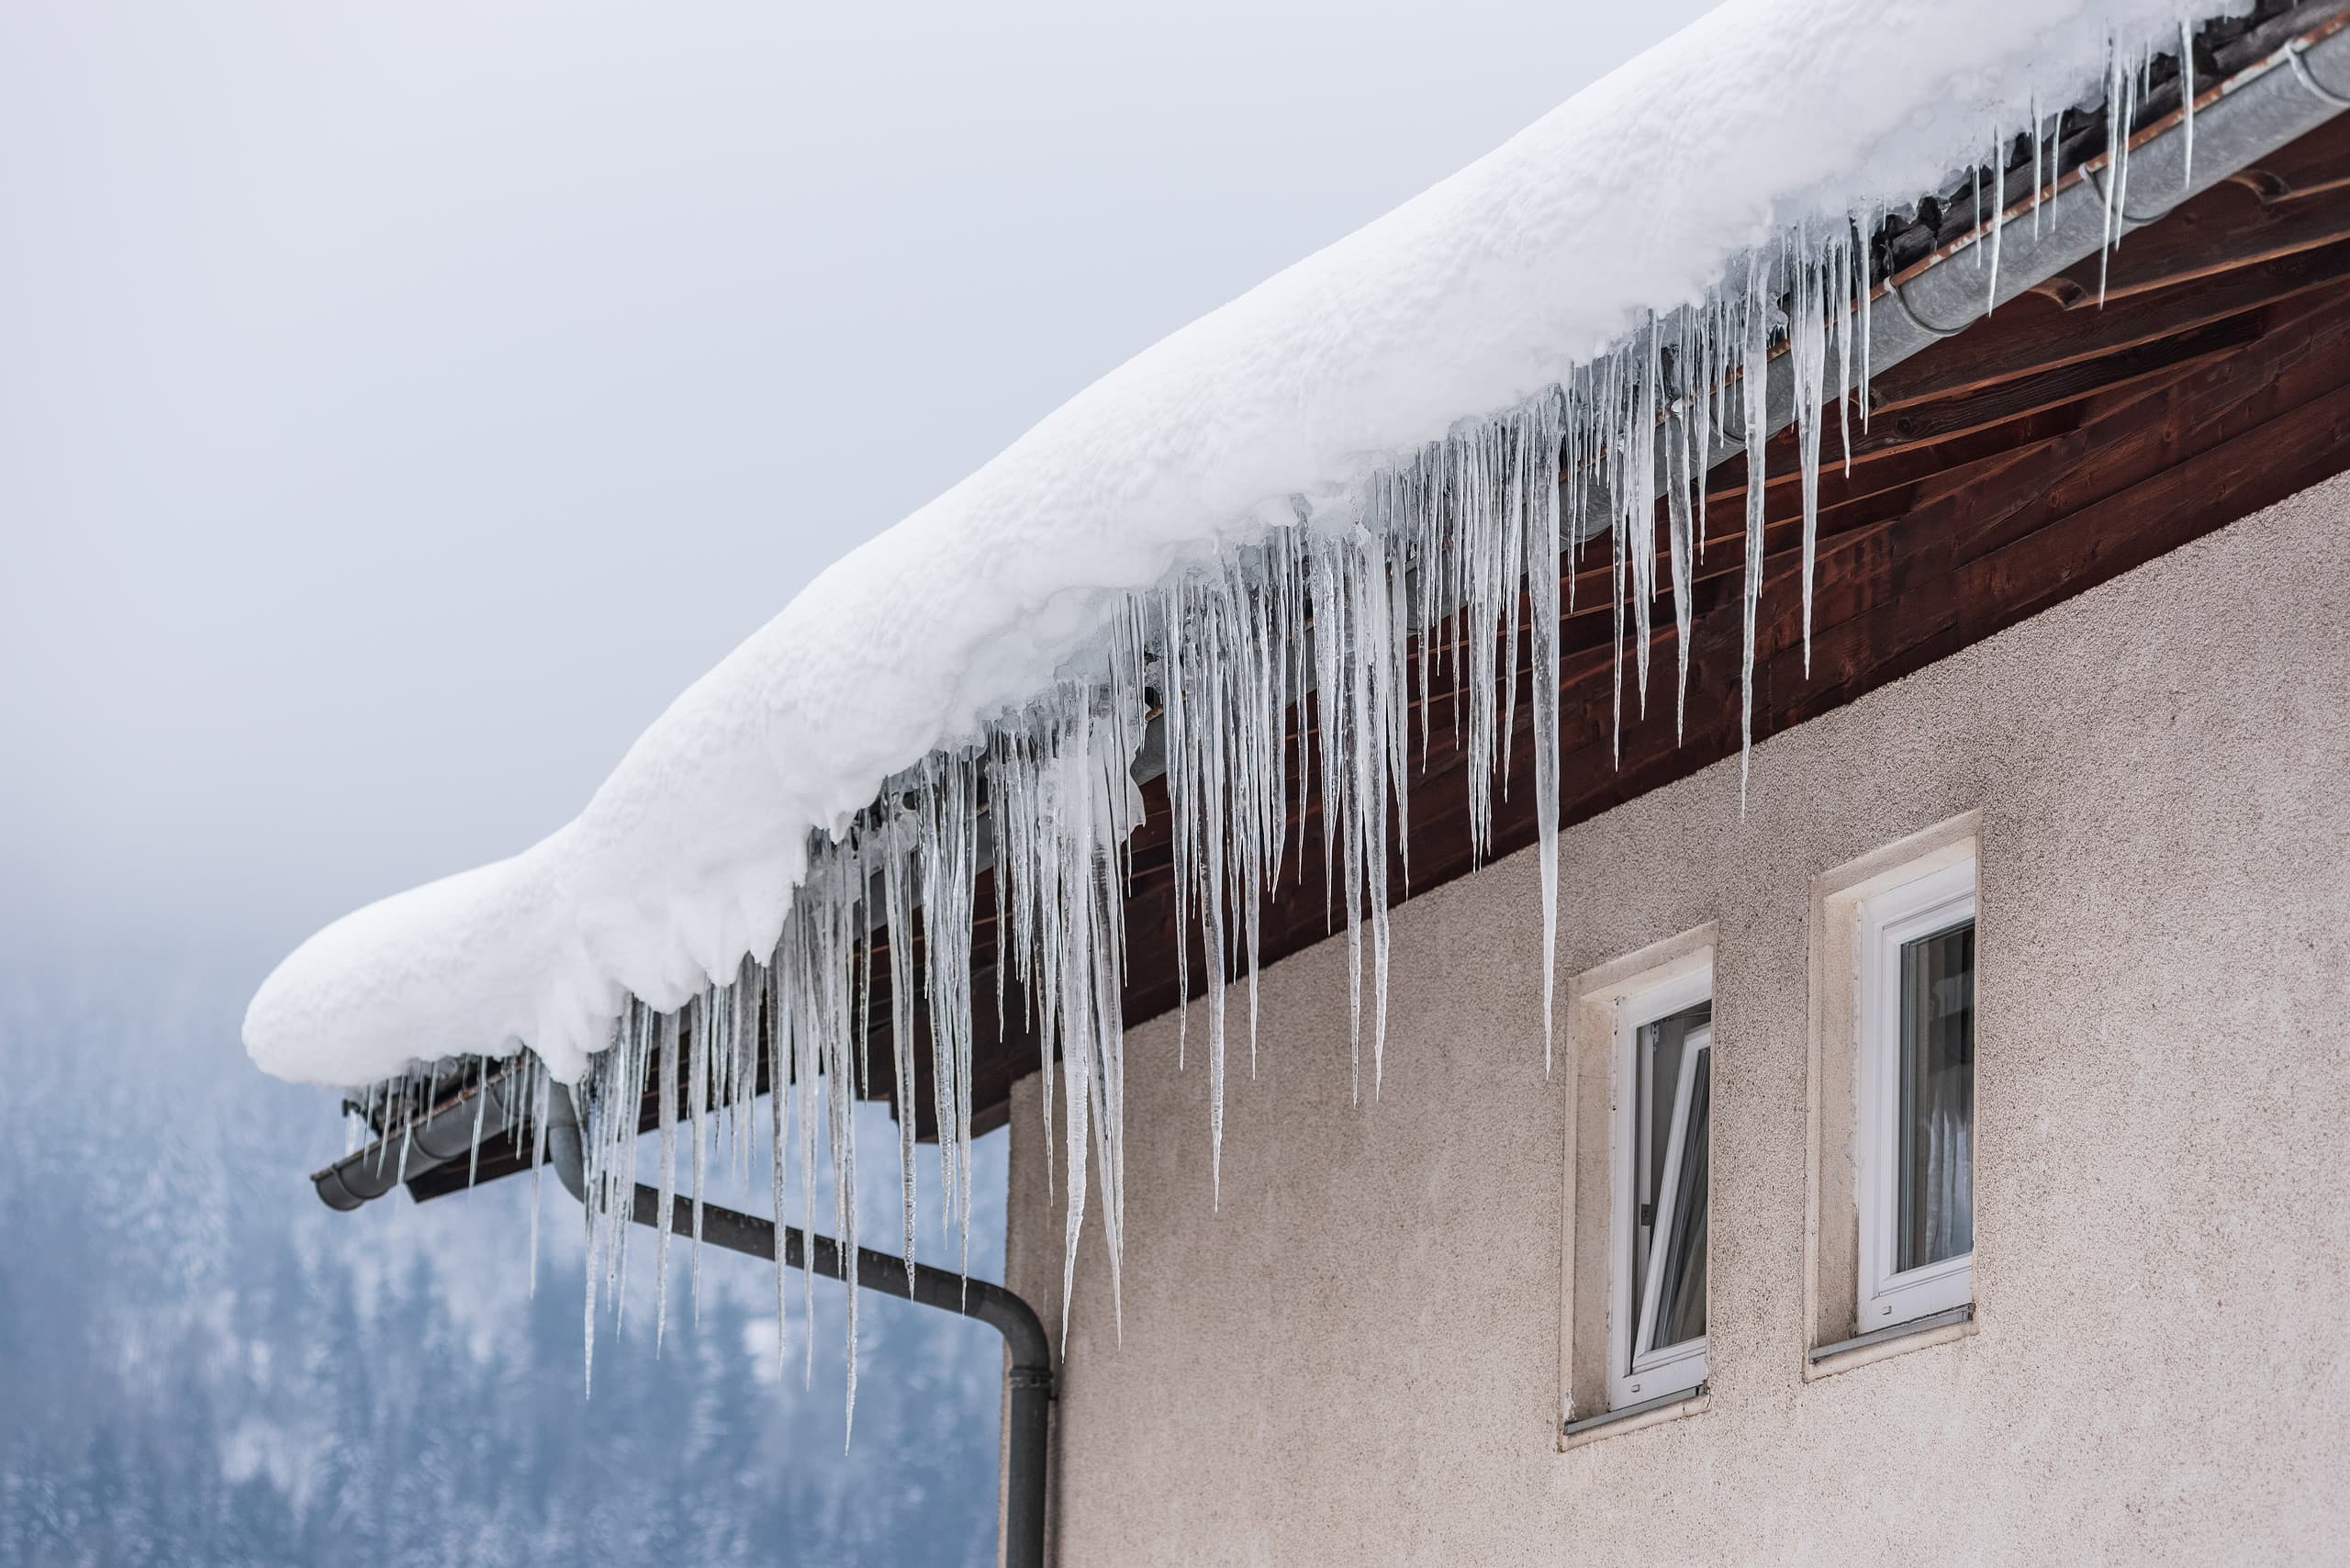 Roofing in winter